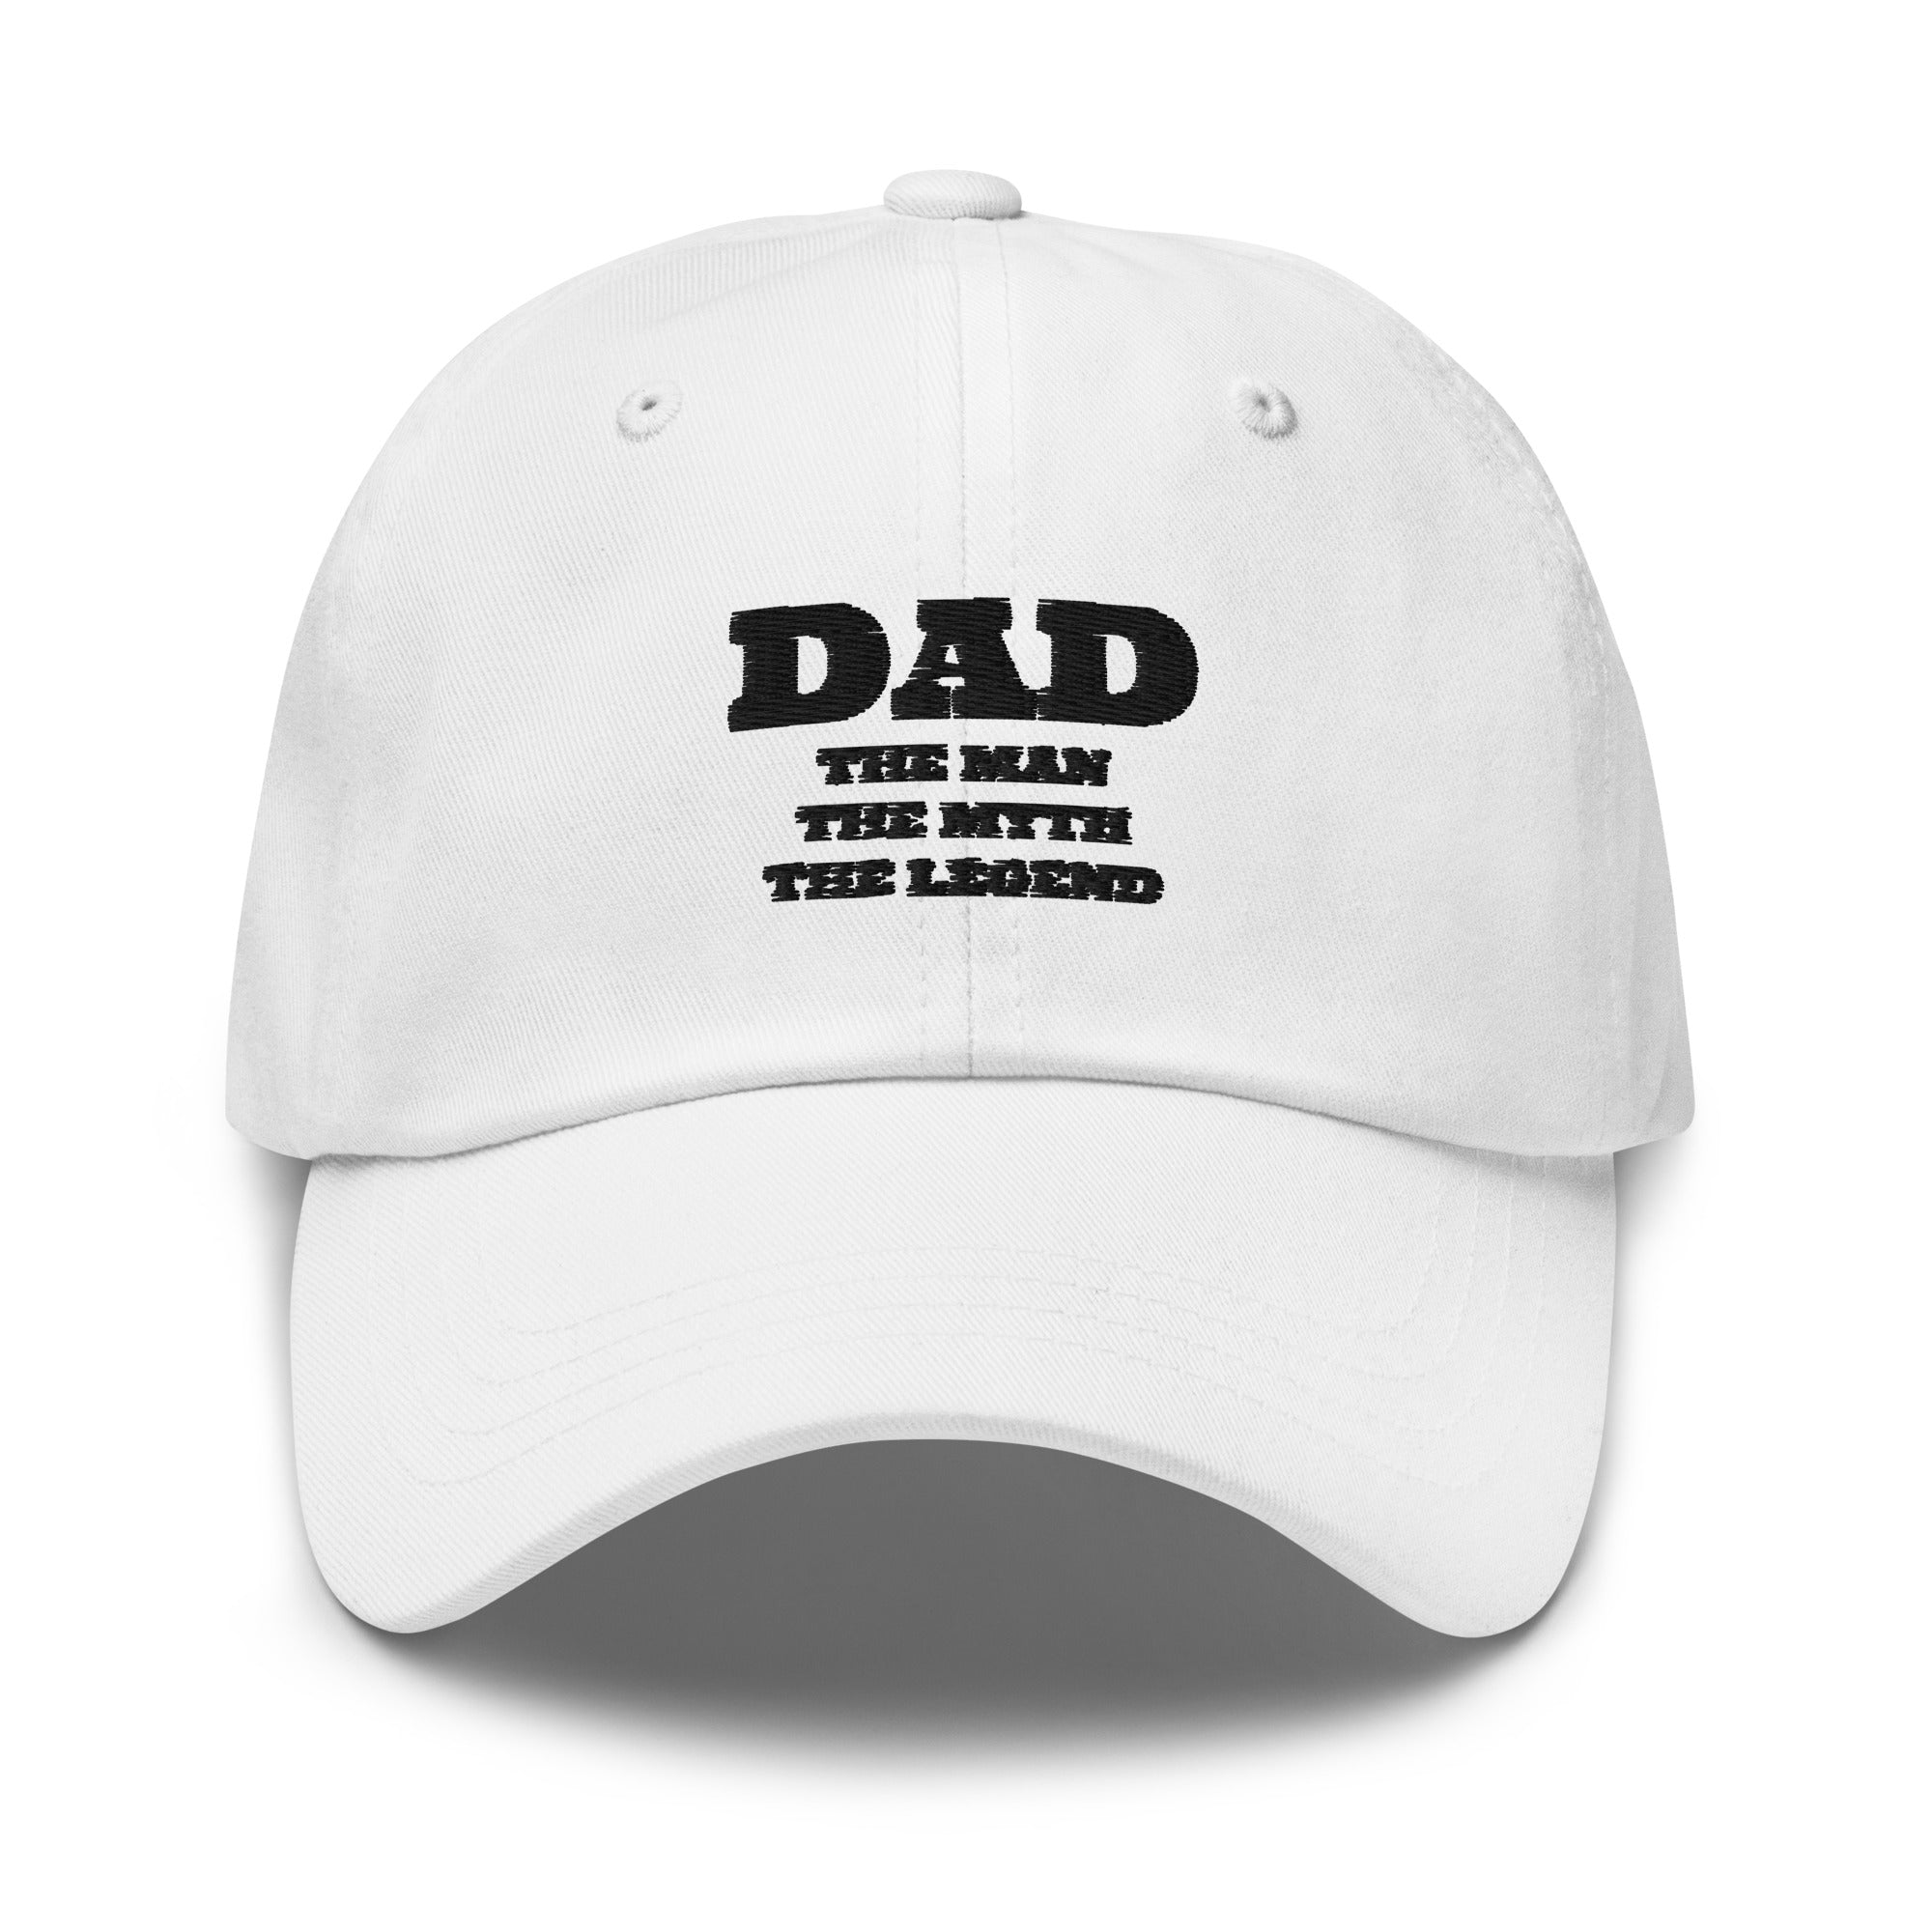 "Dad, The Man, The Myth, the Legend" Embroidered Dad Hat - Light Colors